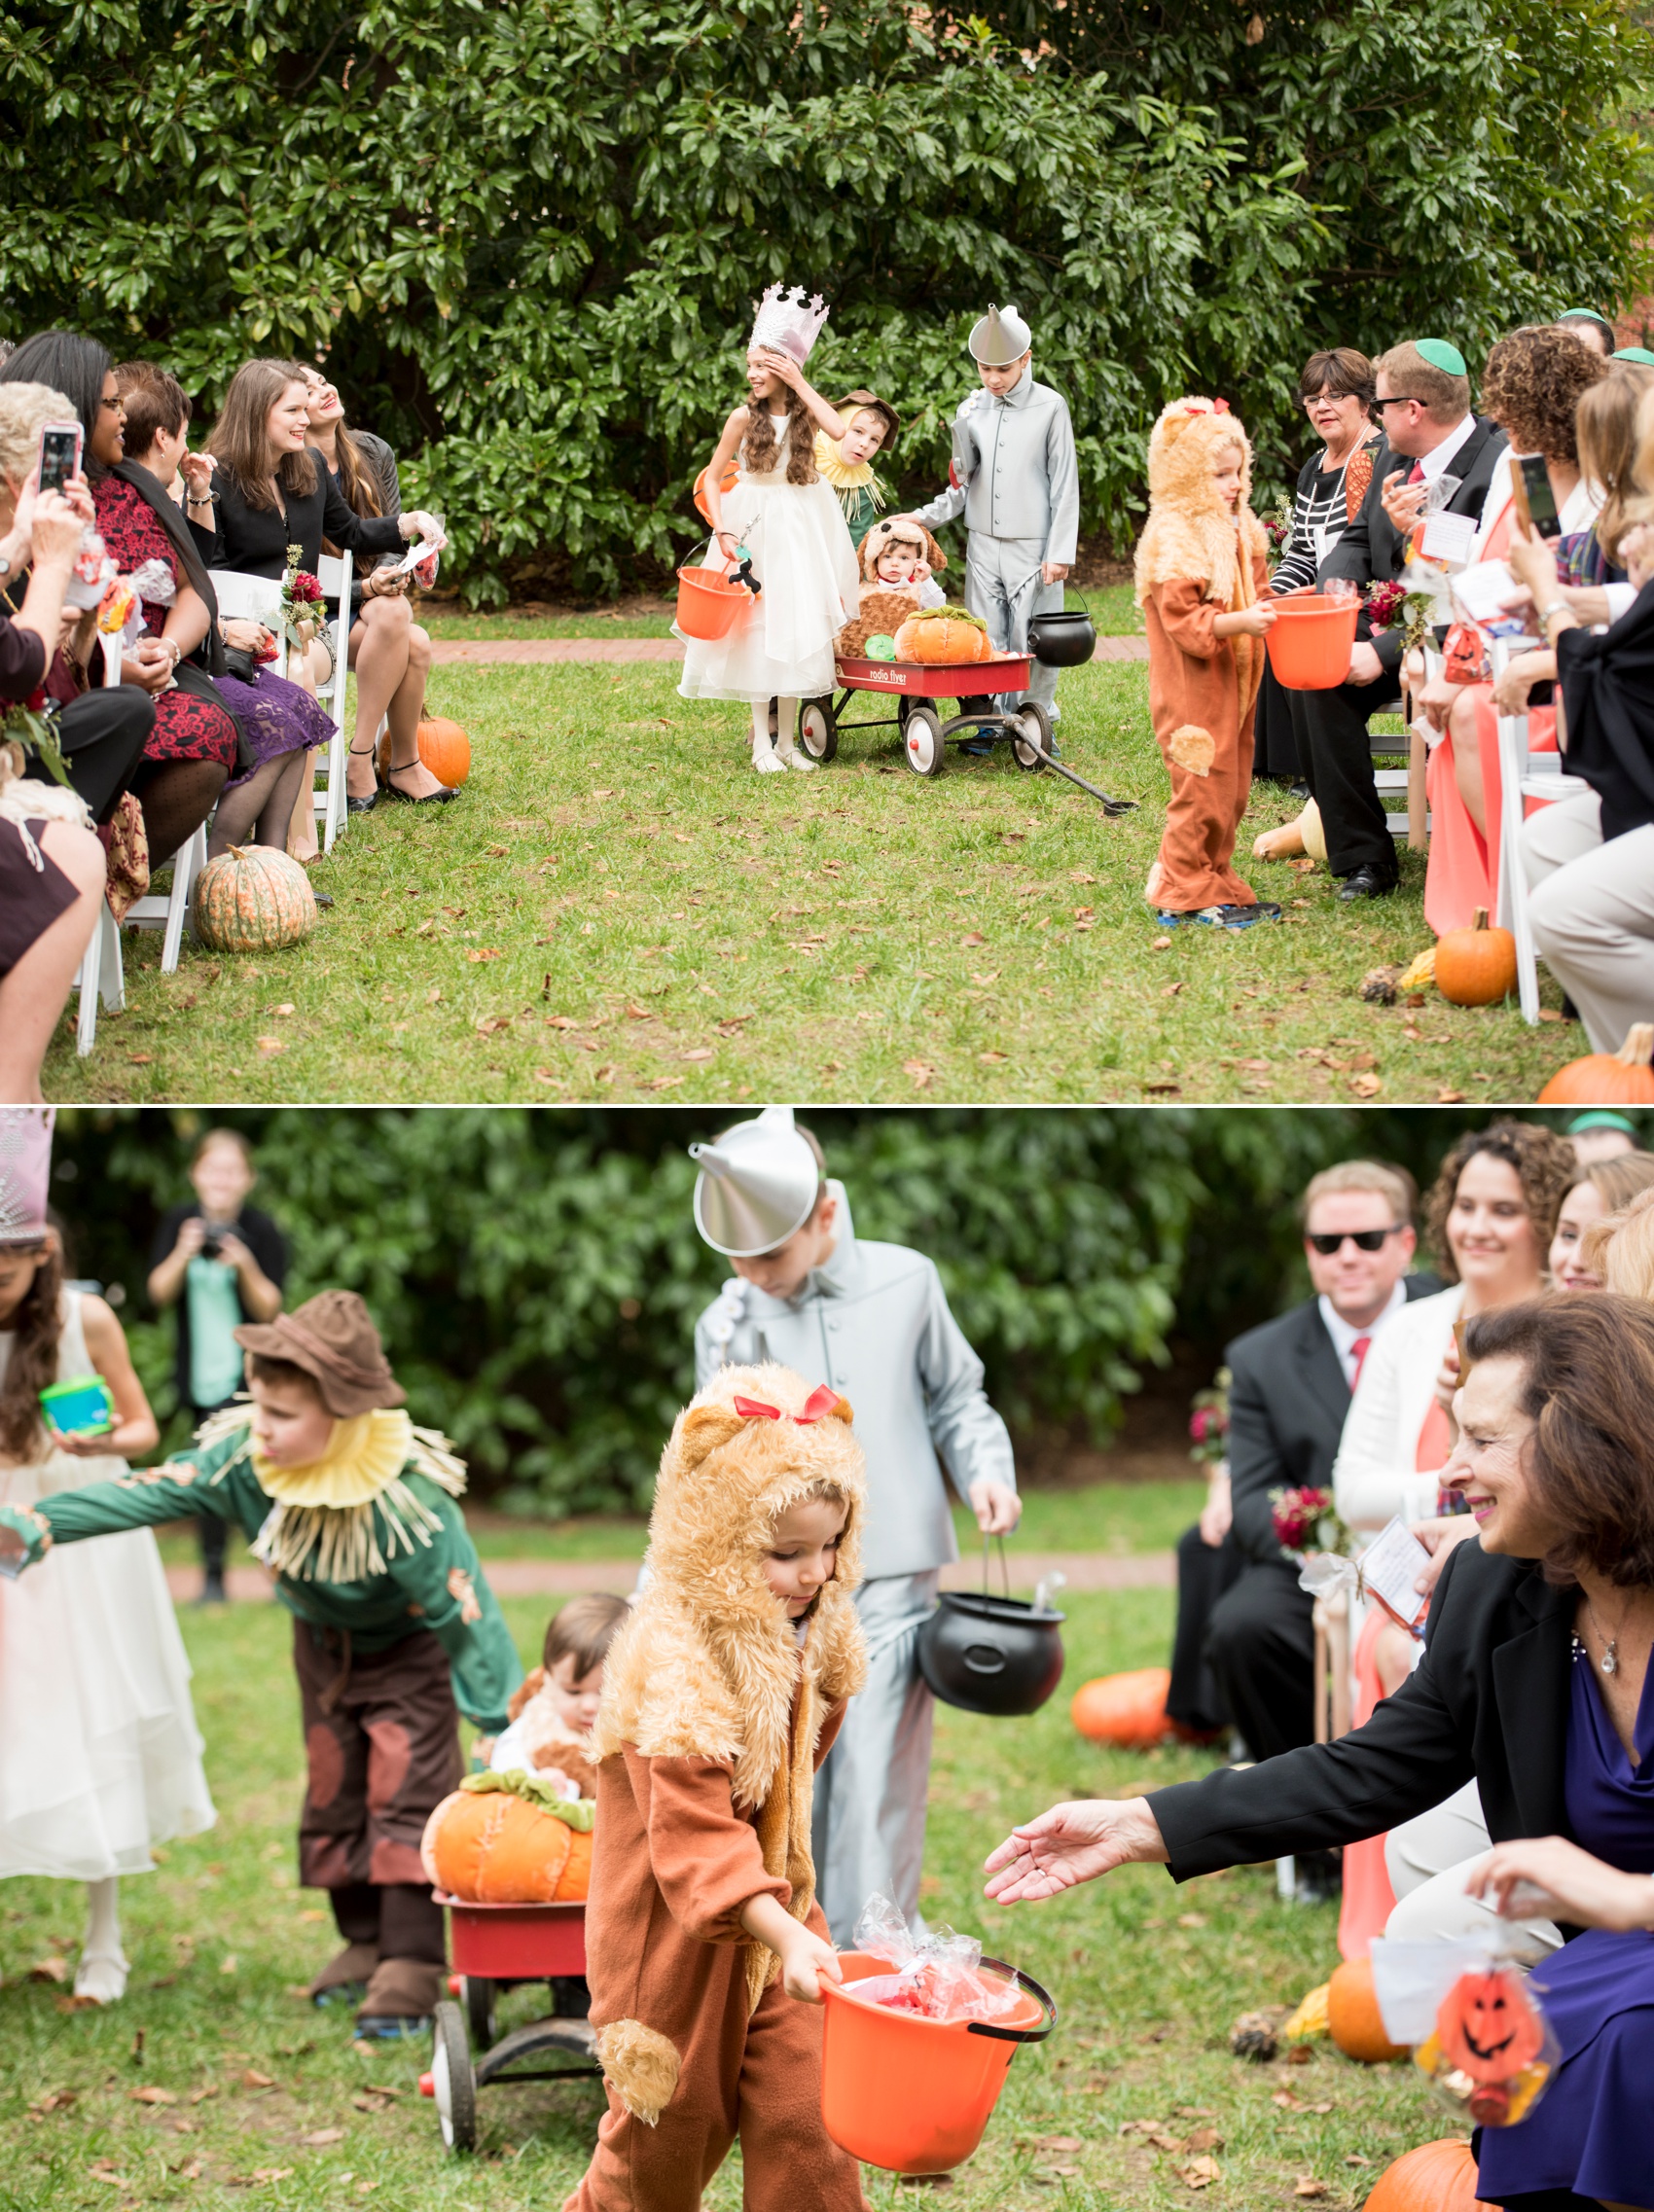 Halloween wedding with The Wizard of Oz flower girl and ring bearers. Photos by Mikkel Paige Photography for a wedding at The Carolina Inn, Chapel Hill, NC.